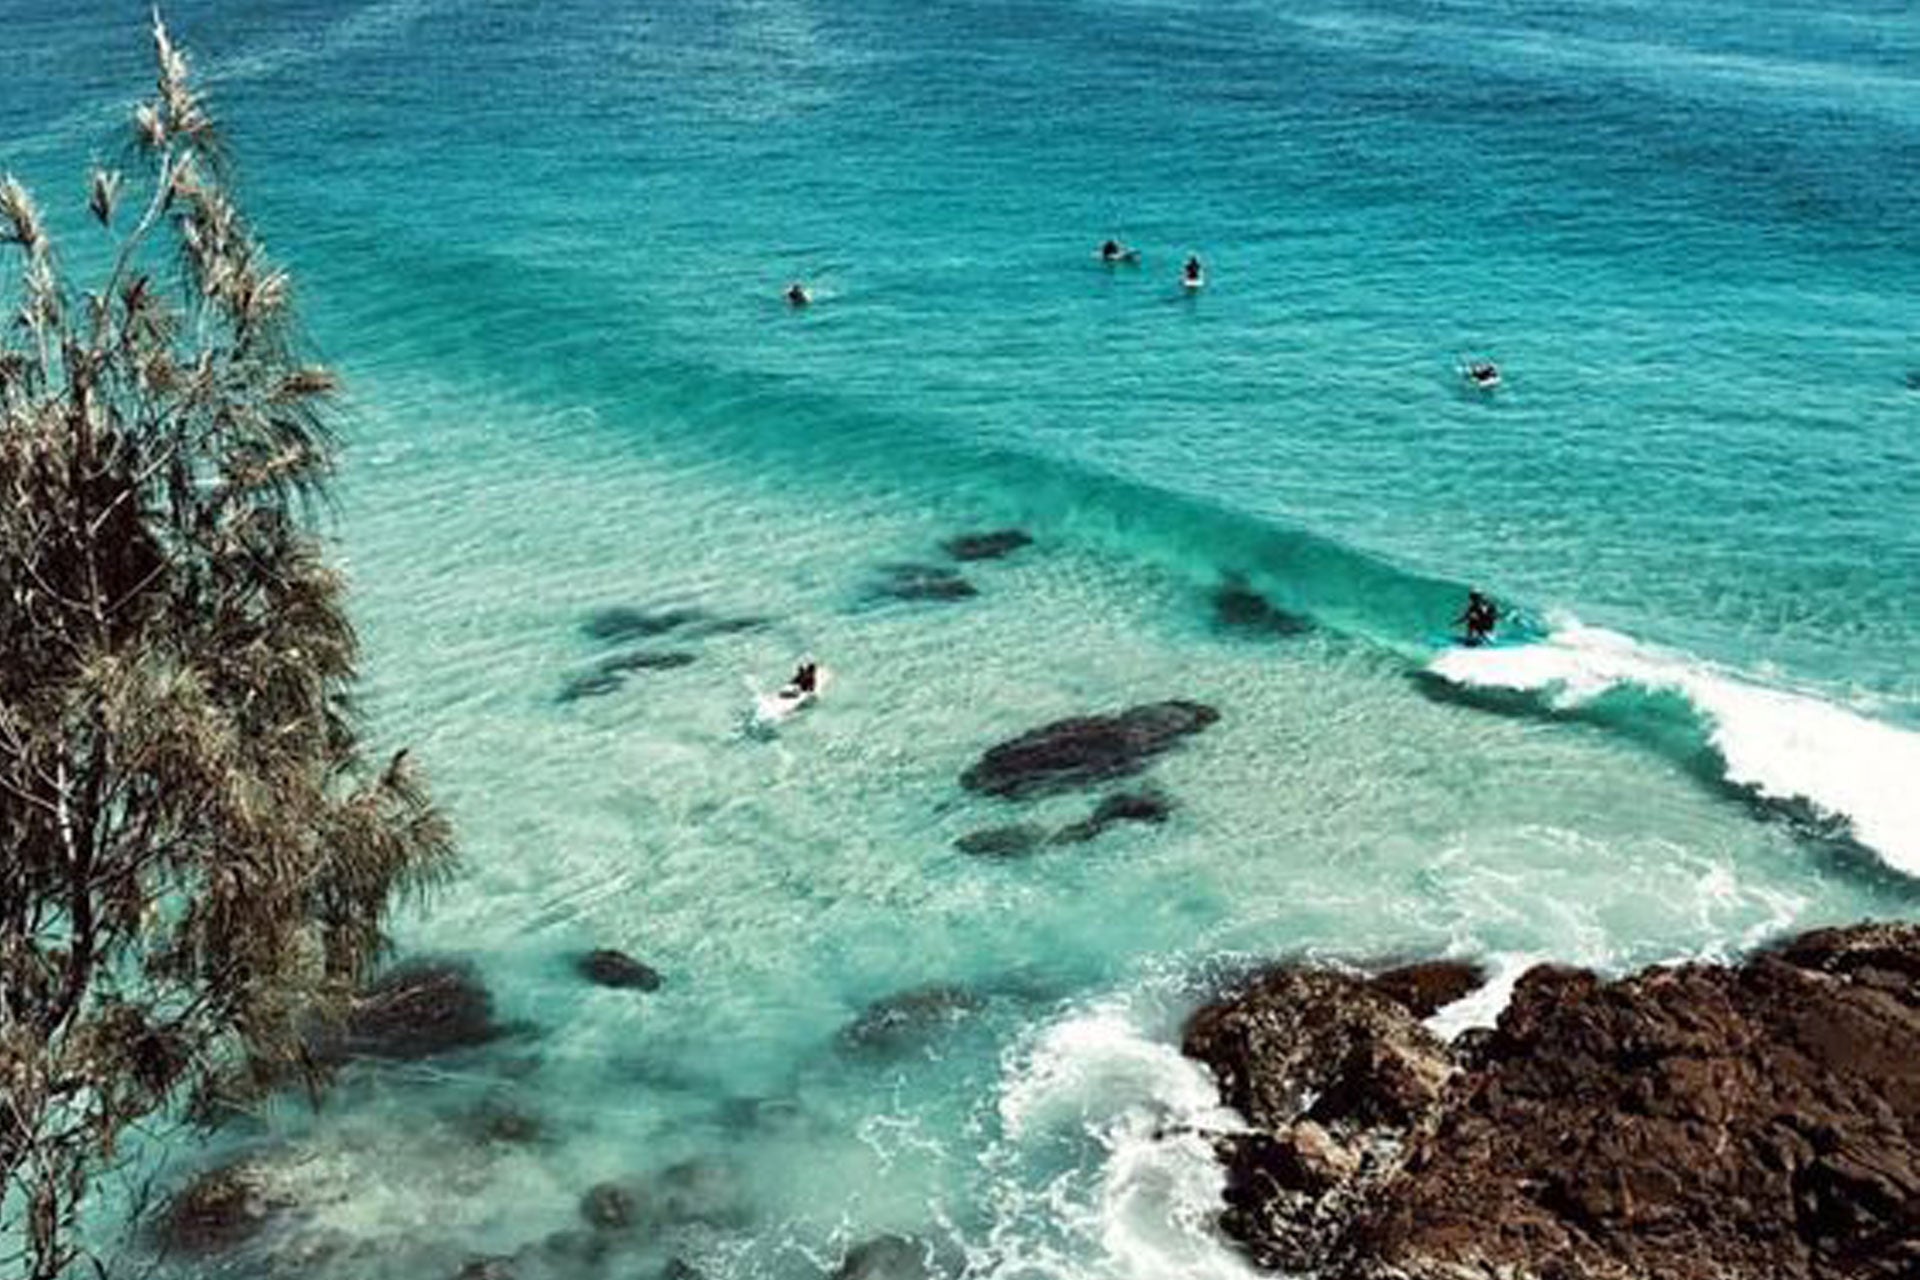 Escape to Byron Bay - here's our guide